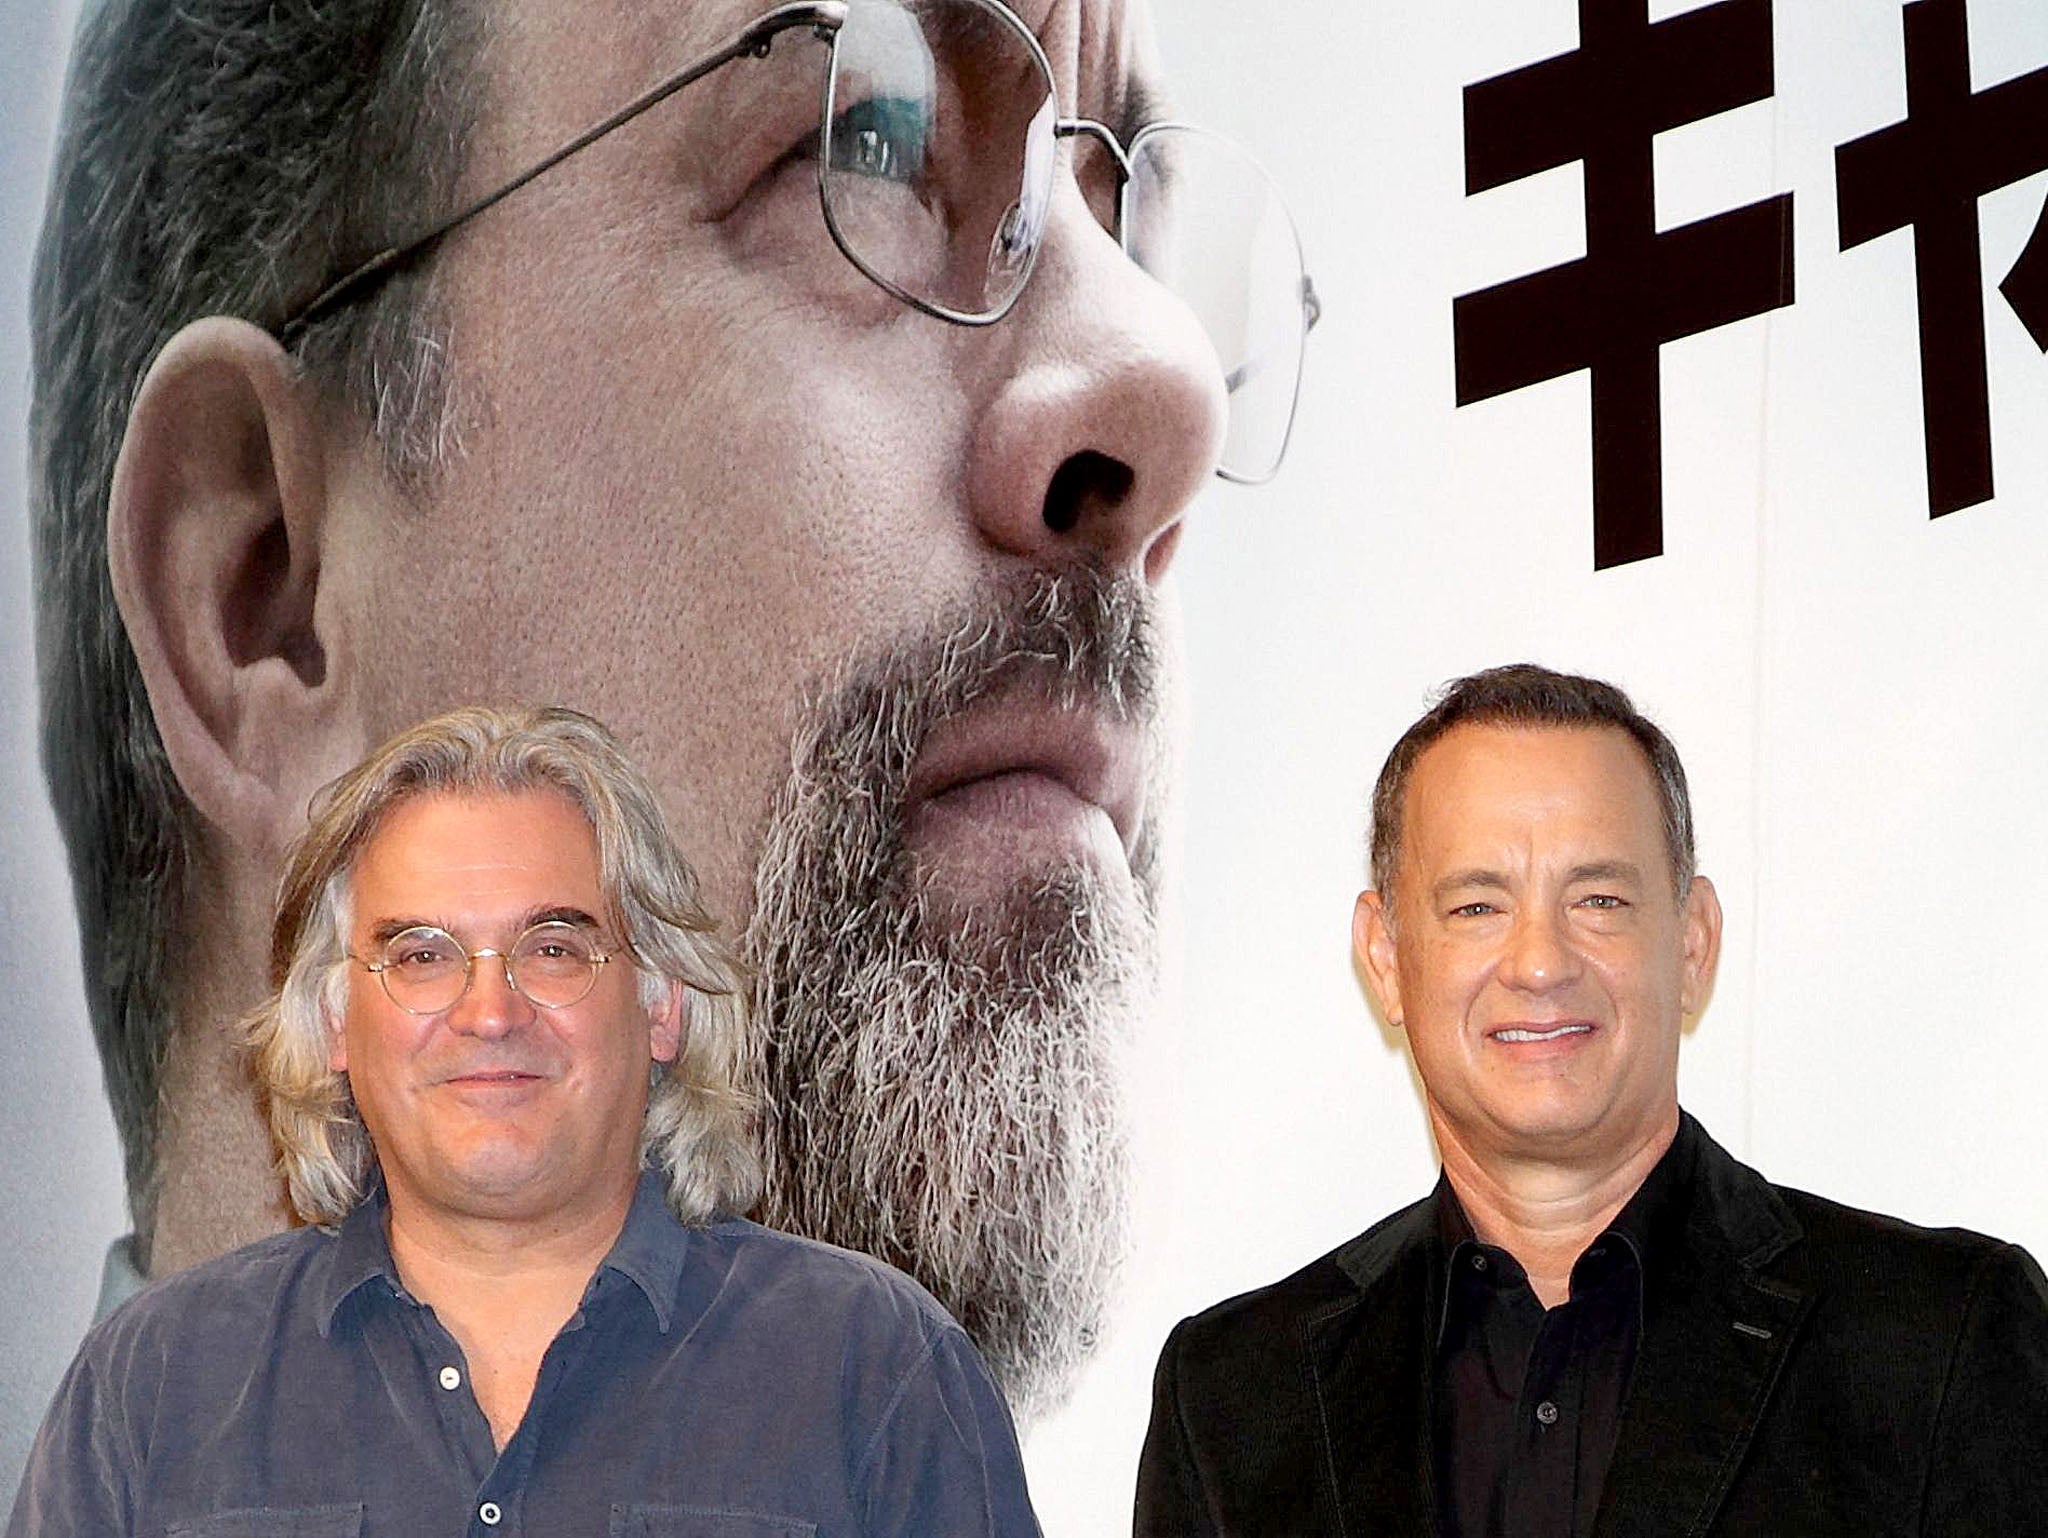 Director Paul Greengrass and leading actor Tom Hanks at the Captain Phillips press conference in Tokyo in 2013